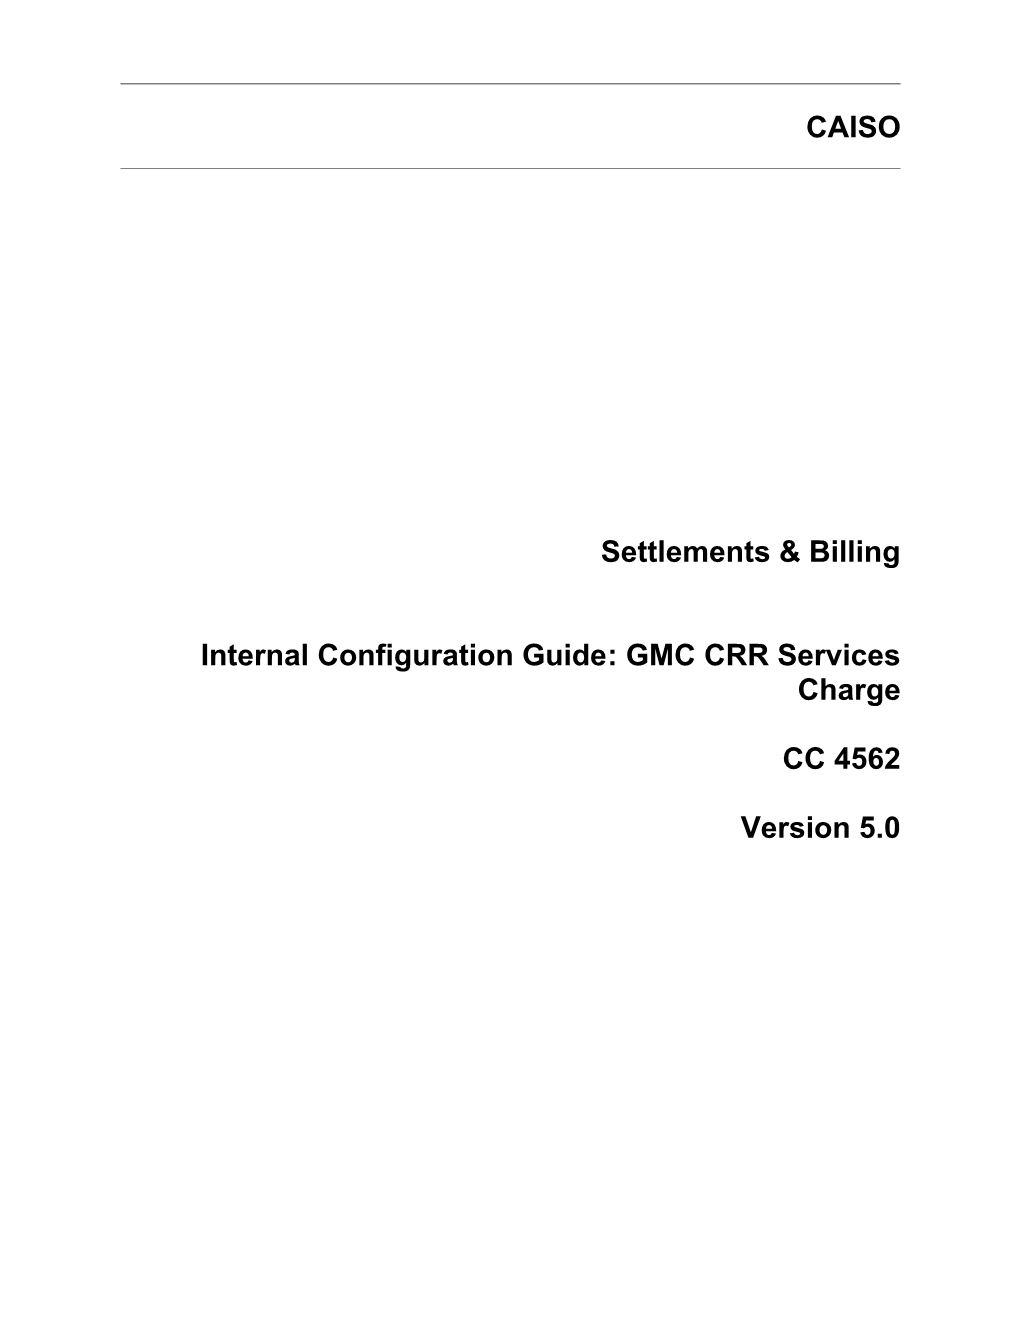 GMC CRR Services Charge